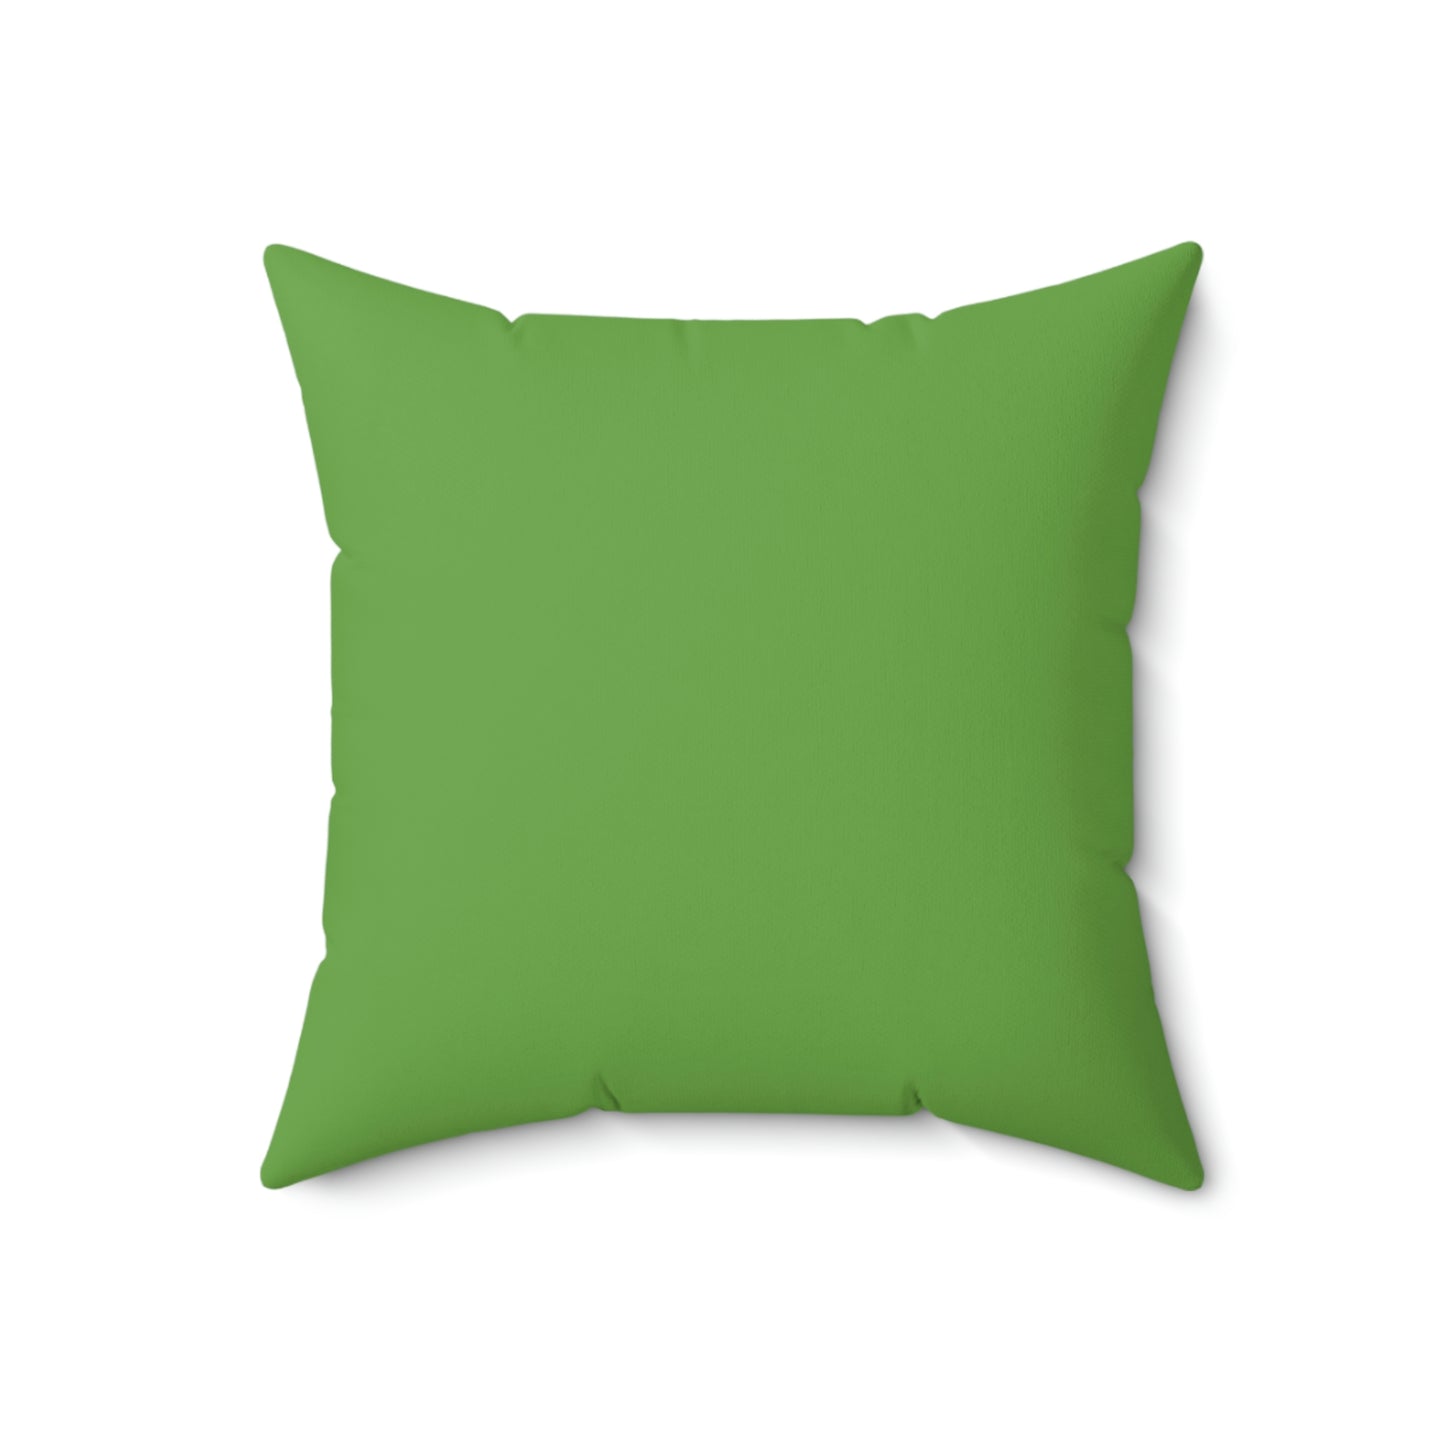 Spun Polyester Square Pillow Case “Knowledge Powered by Google on Green”